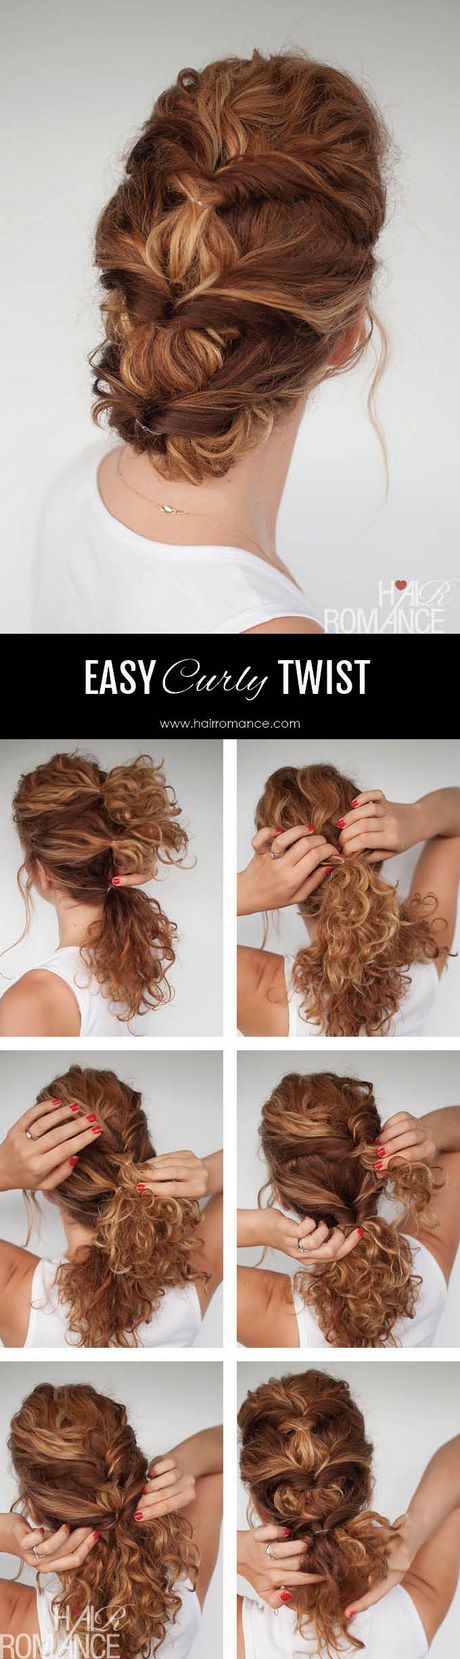 Casual hairstyles for curly hair casual-hairstyles-for-curly-hair-05_5